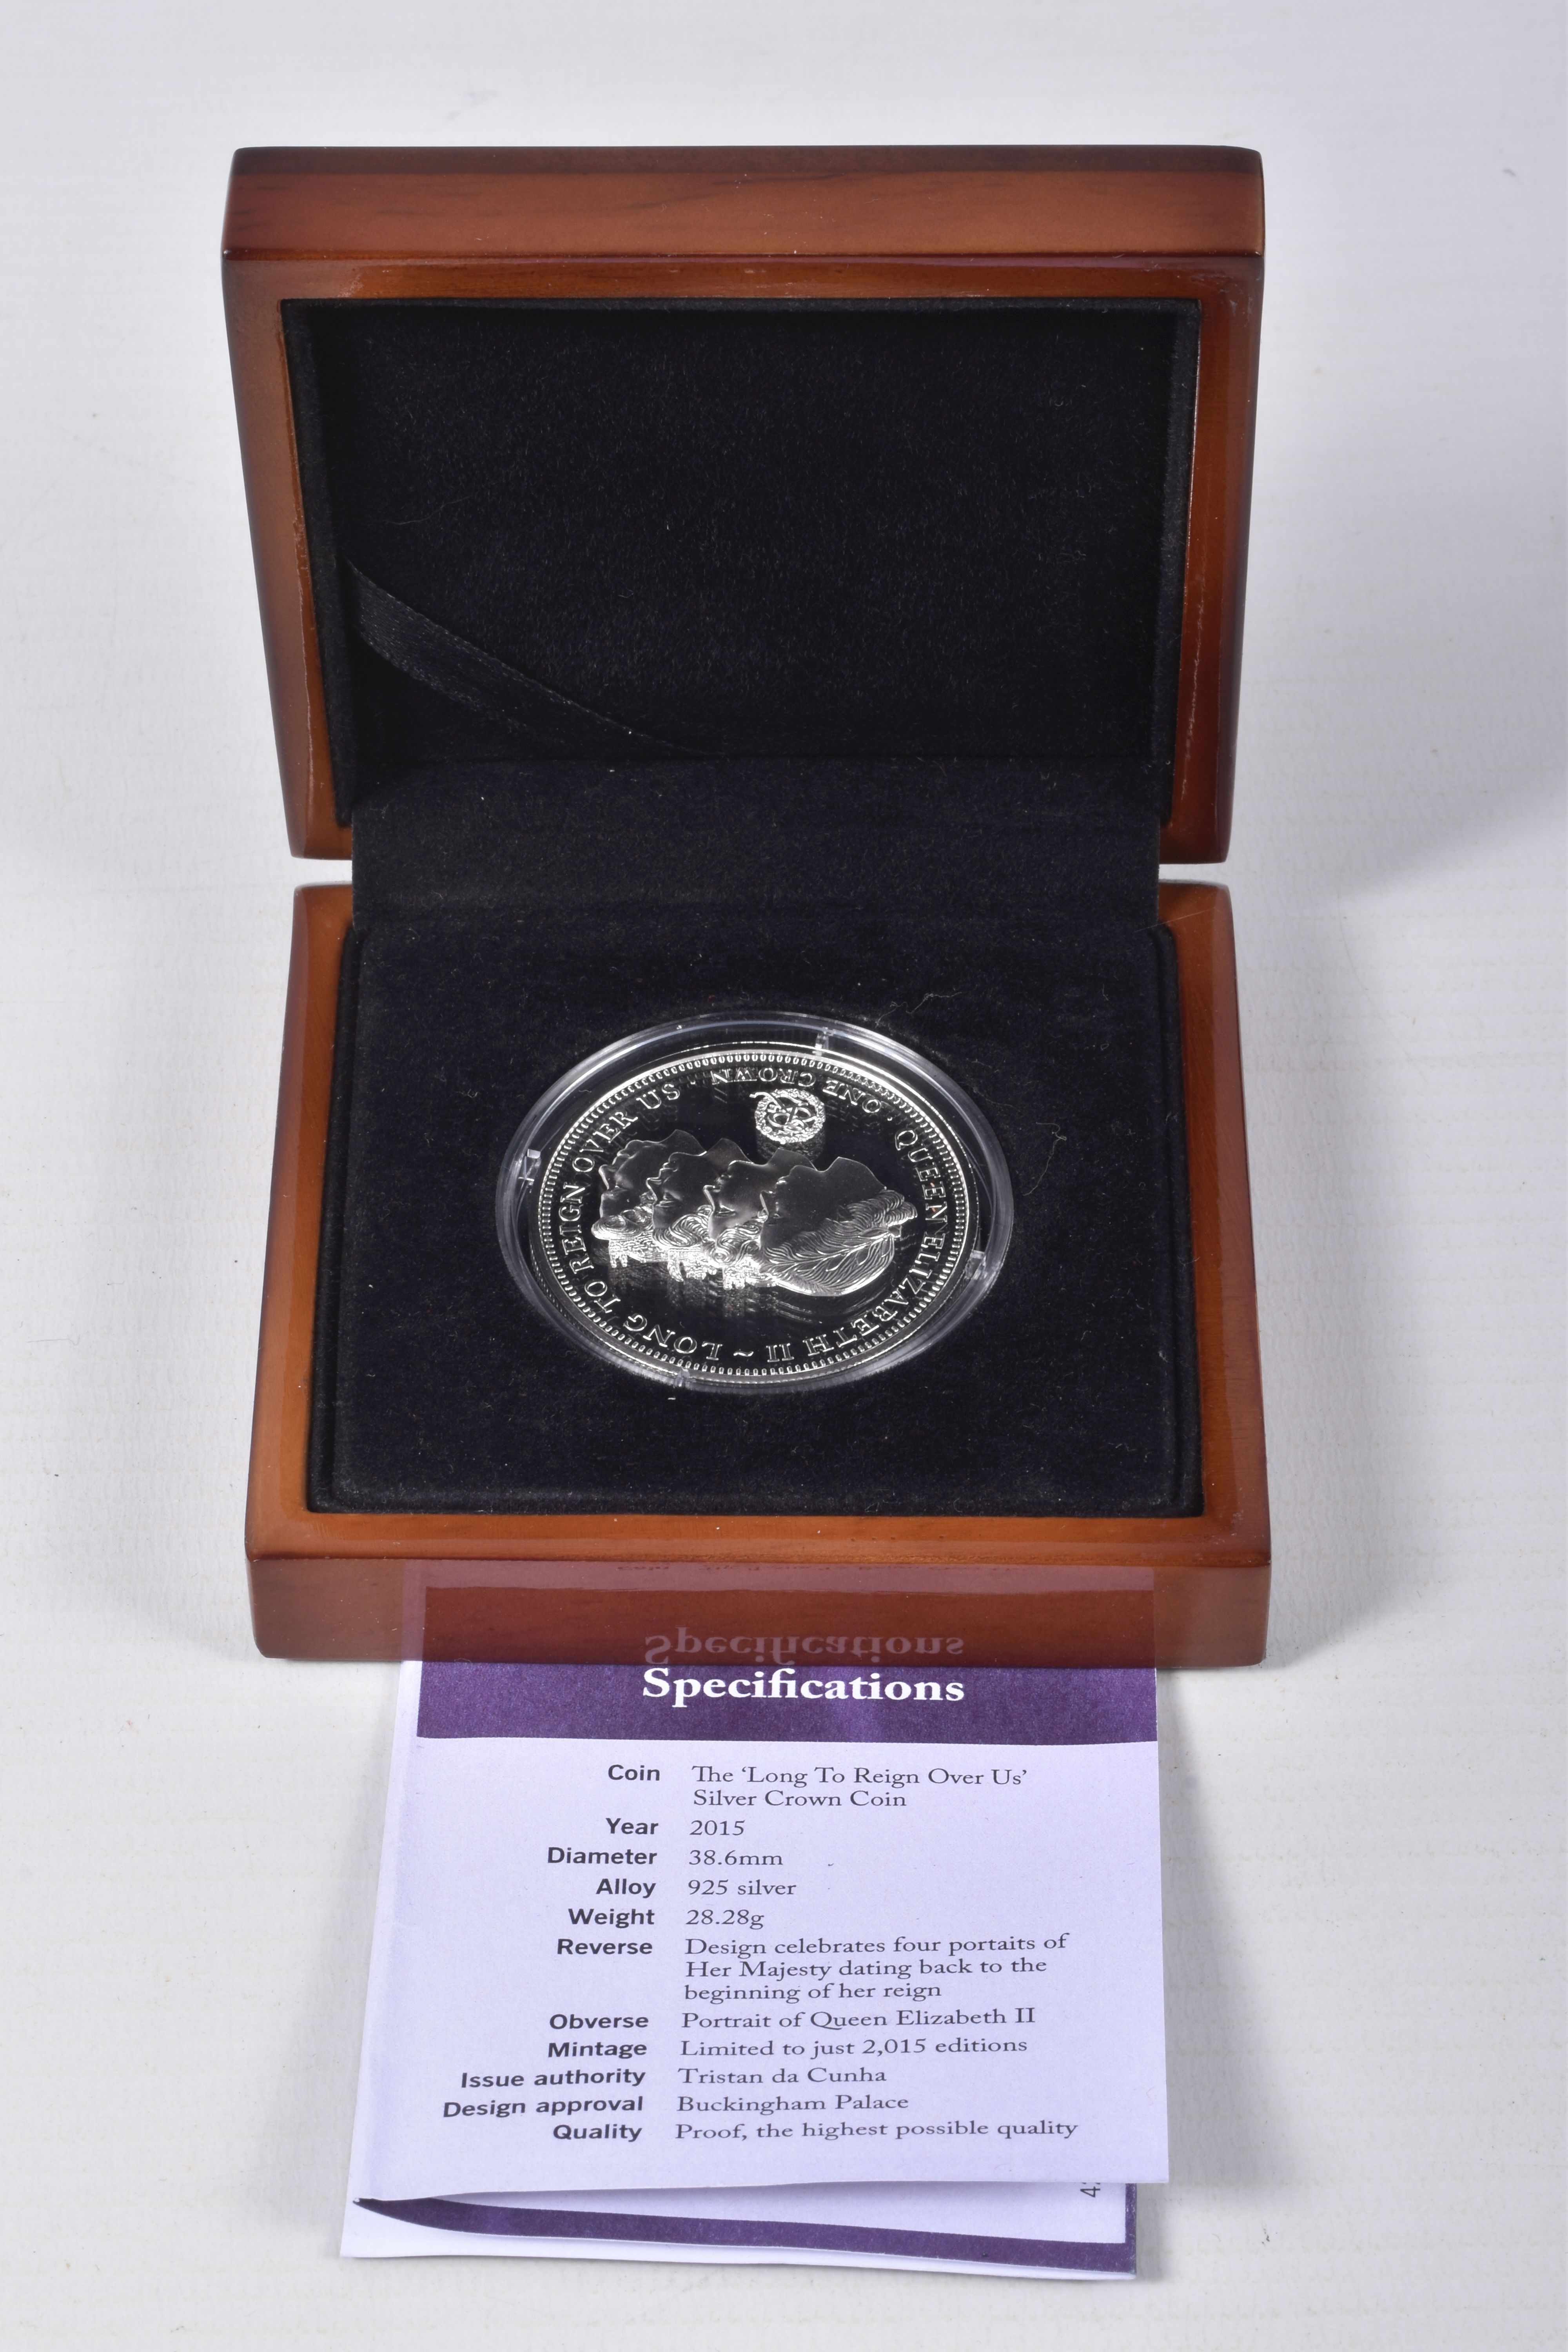 A 2012 SILVER PROOF .925 RENAMED THE ELIZABETH TOWER (Big Ben Clock Tower) 2oz Numisproof box and - Image 2 of 9